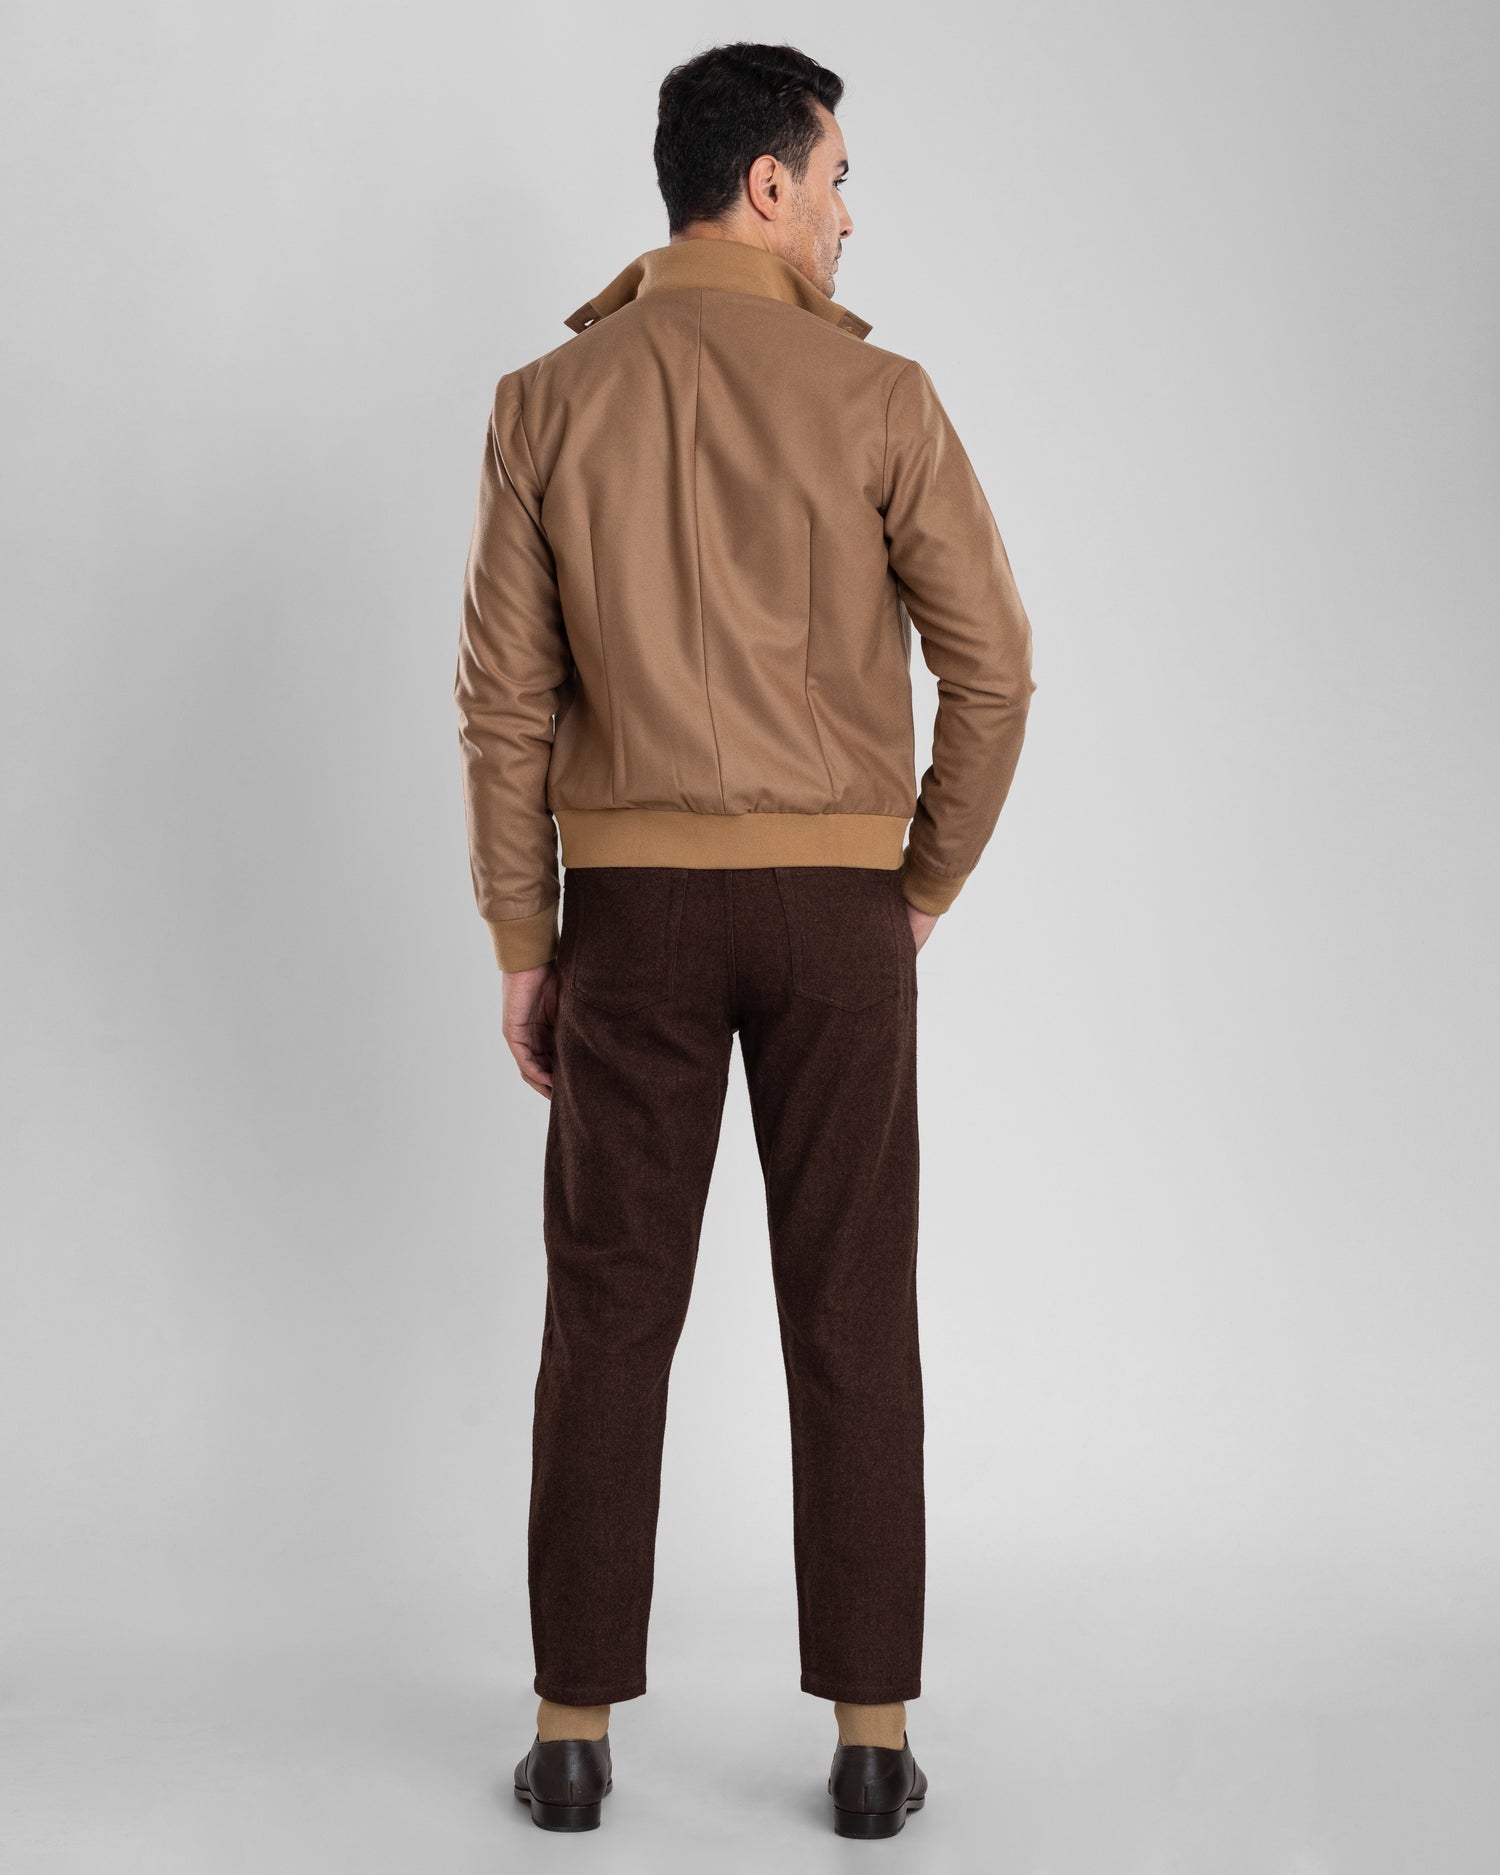 Back of model wearing the flannel shirt jacket for men by Luxire in sand with rib collar